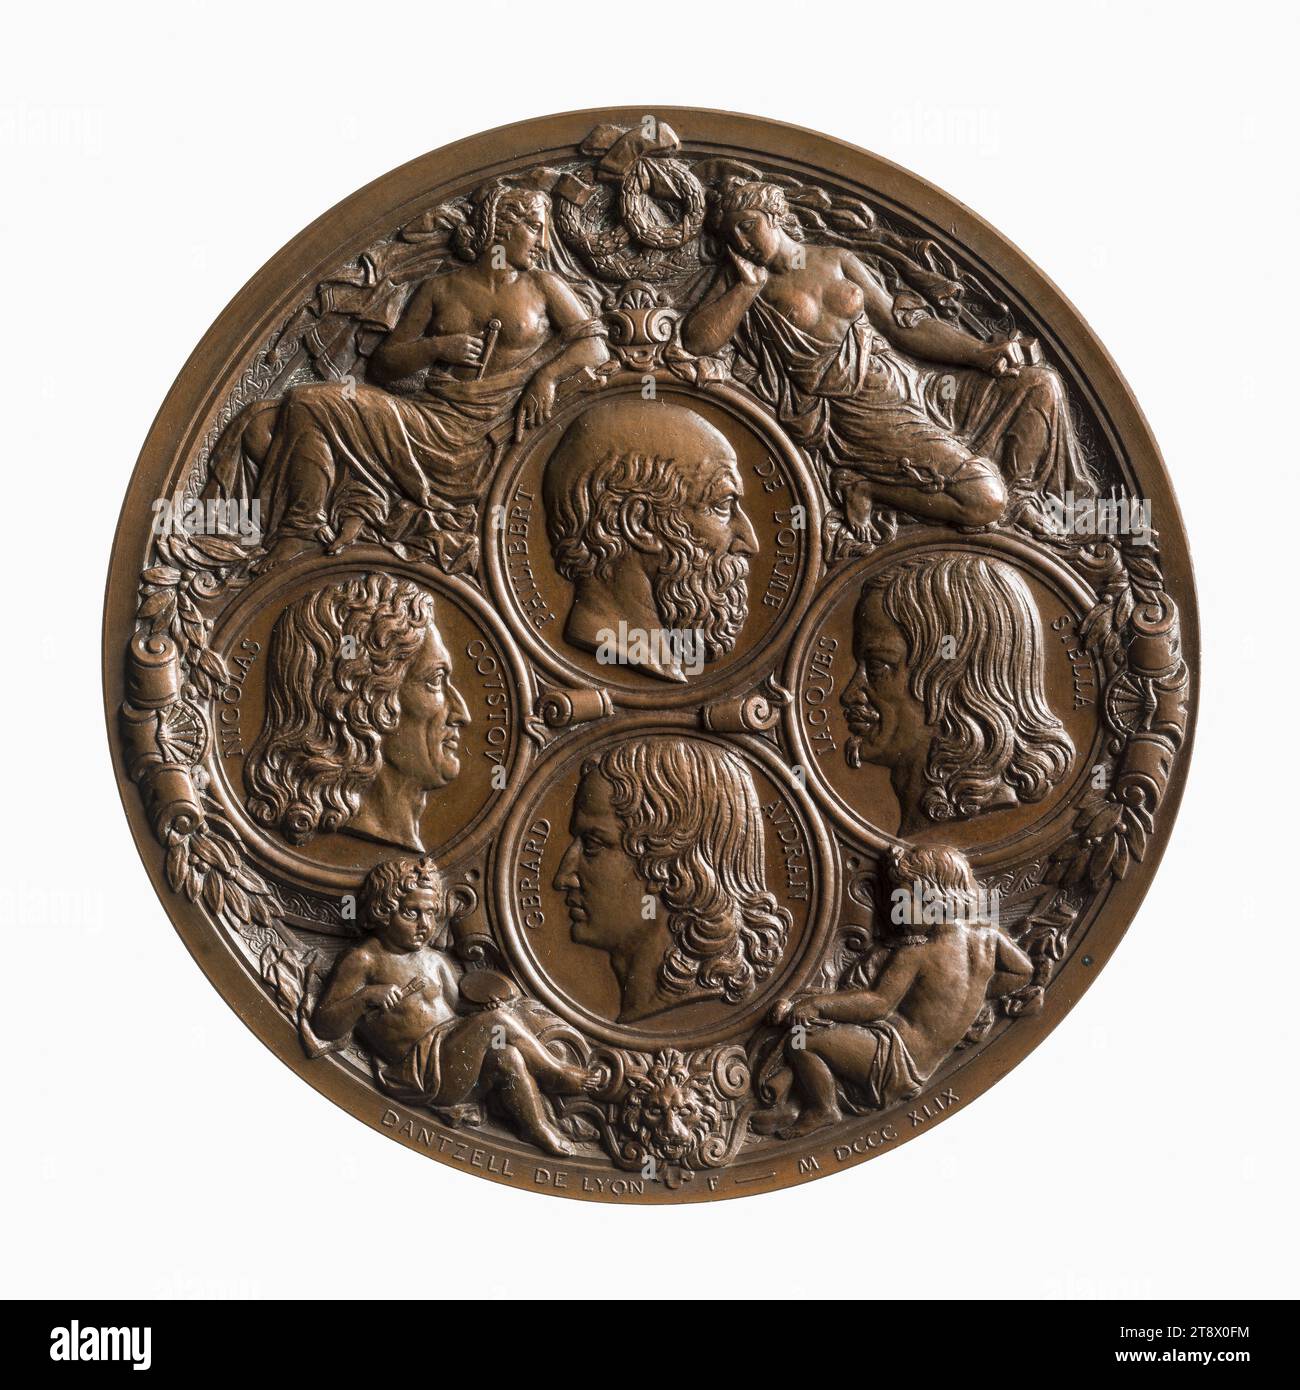 Medal of the Society of Friends of the Arts of Lyon founded in 1836, 1849, Dantzell, Joseph, Engraver in medals, Array, Numismatics, Medal, Dimensions - Work: Diameter: 8.1 cm, Weight (type dimension): 256.29 g Stock Photo